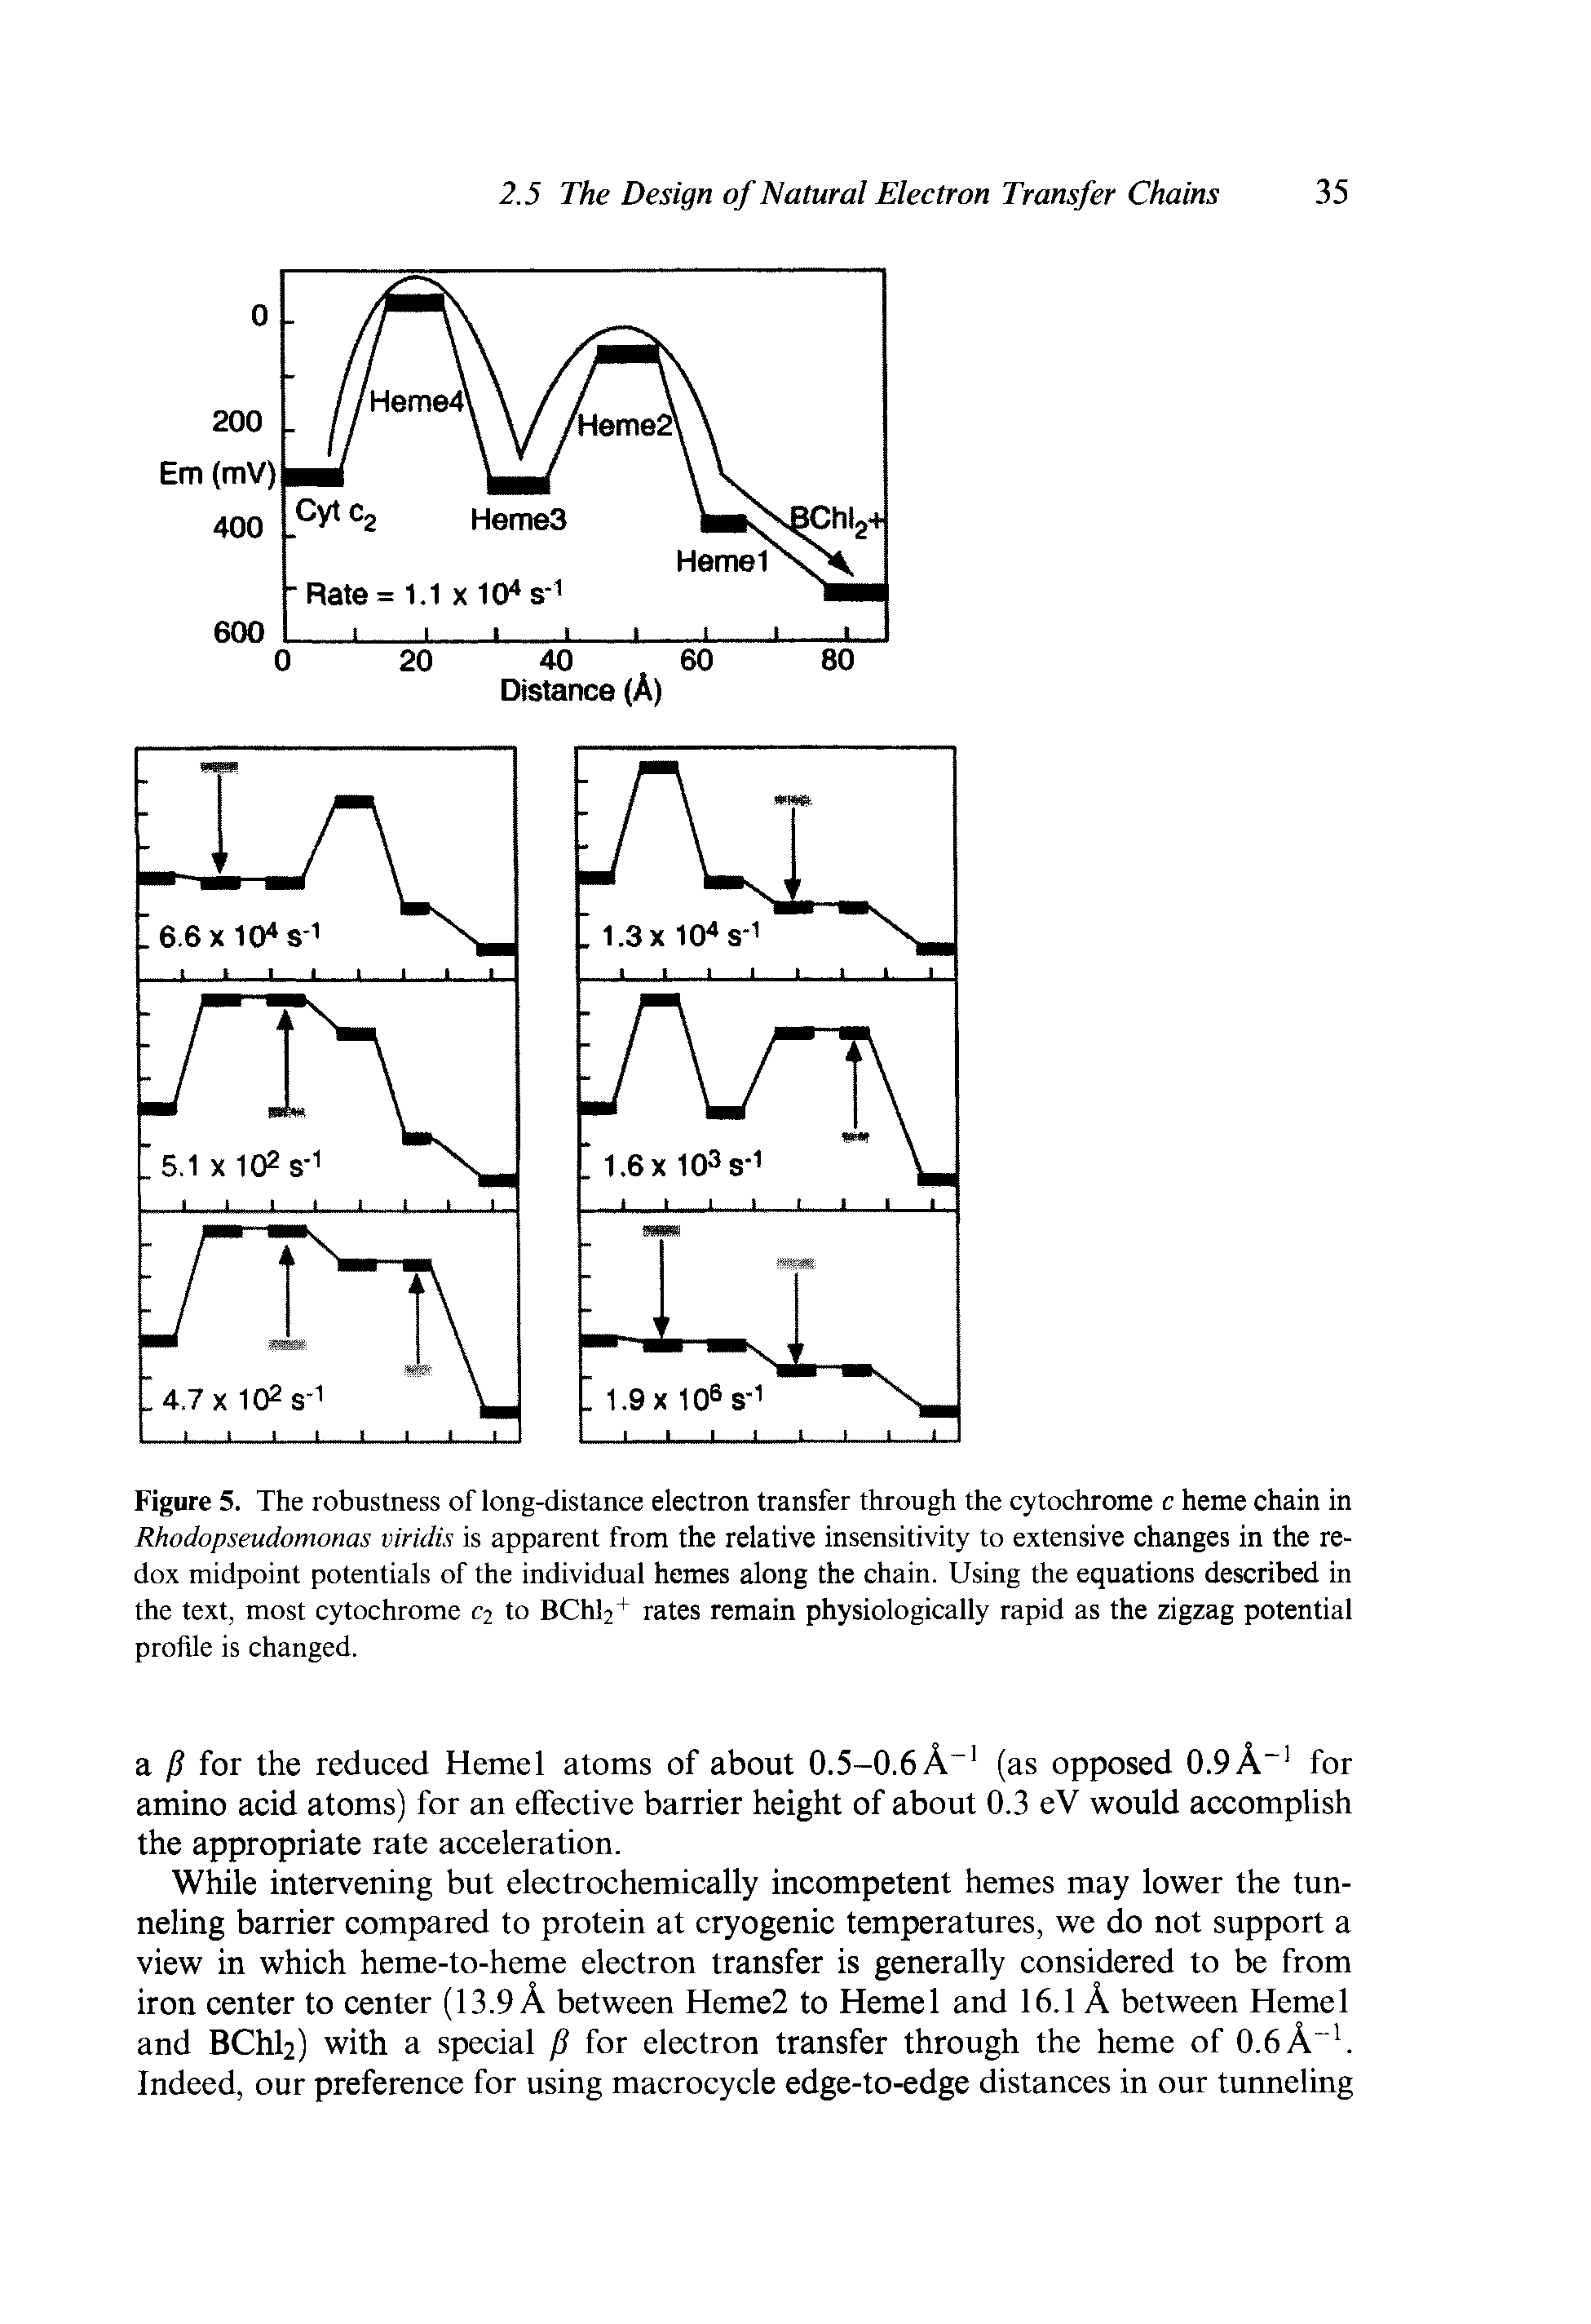 Figure 5. The robustness of long-distance electron transfer through the cytochrome c heme chain in Rhodopseudomonas viridis is apparent from the relative insensitivity to extensive changes in the redox midpoint potentials of the individual hemes along the chain. Using the equations described in the text, most cytochrome C2 to BChl2 rates remain physiologically rapid as the zigzag potential profile is changed.